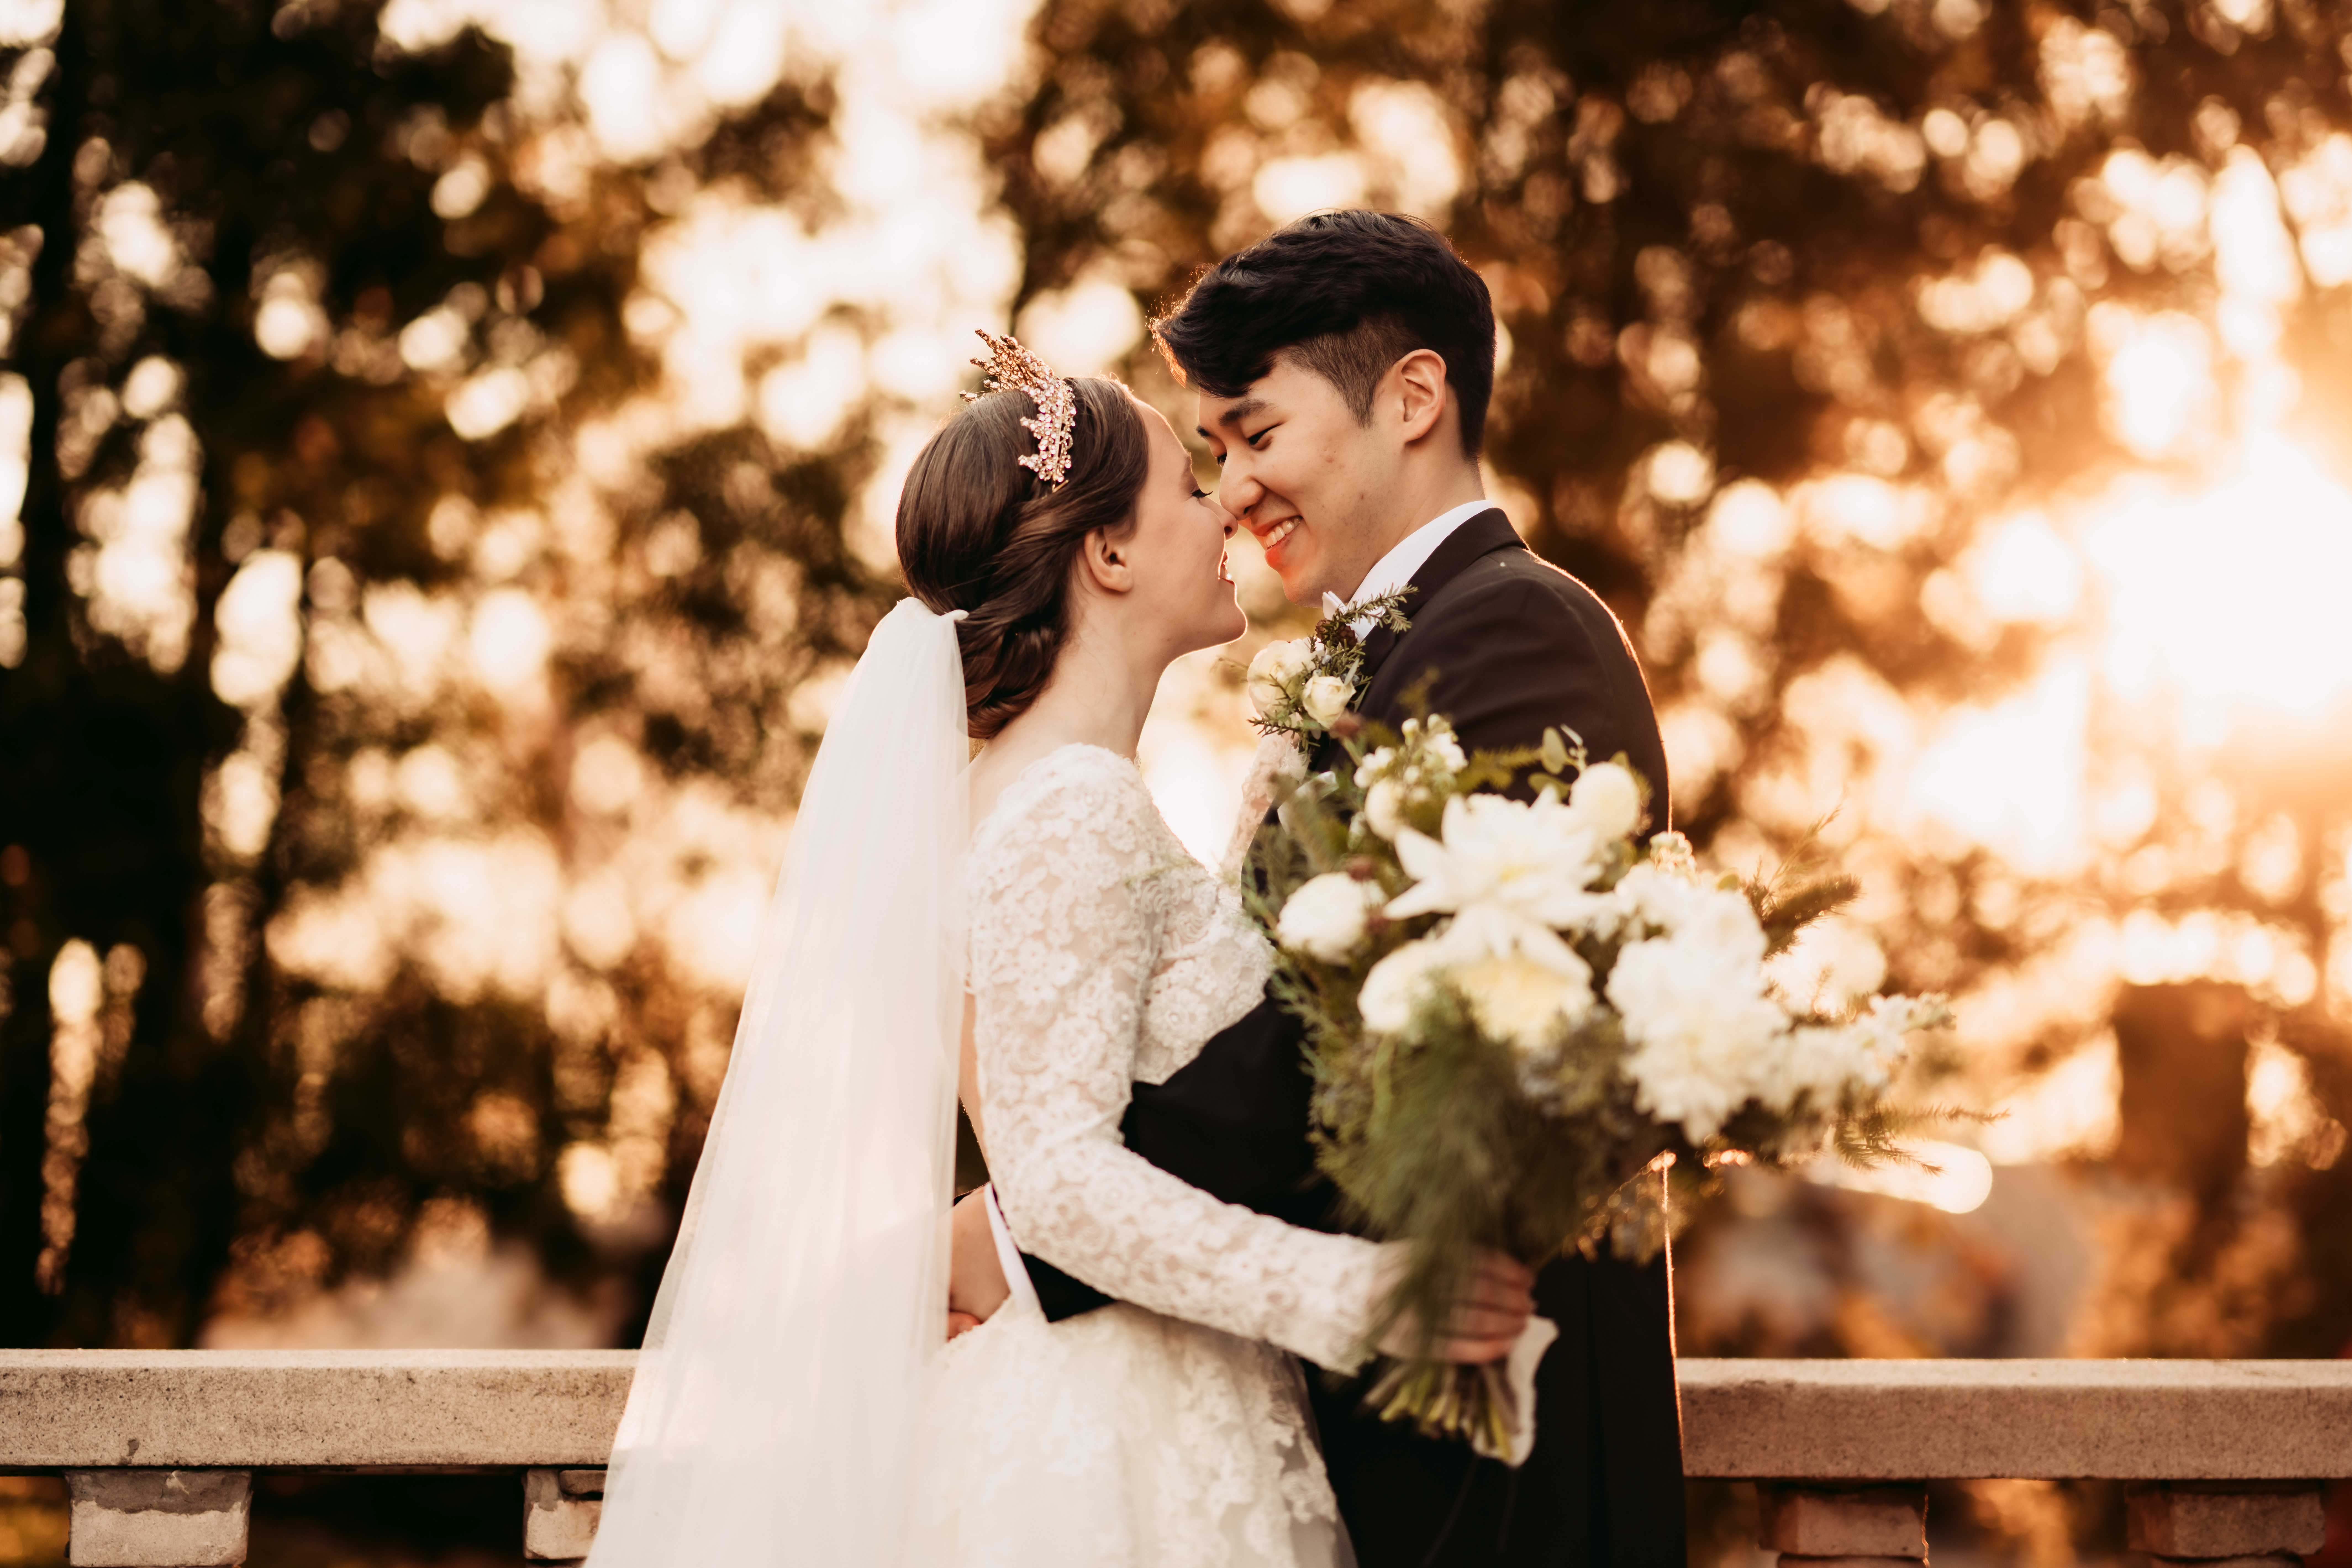 The Manor Wedding Venue, The Manor Wedding Photographer, West Orange Wedding Photographer, NJ Wedding Photographer, Winter Weddings, NJ Winter Wedding, Winter Wedding Photographer, bride and groom nose to nose smiling with the sunset behind them for their winter wedding 